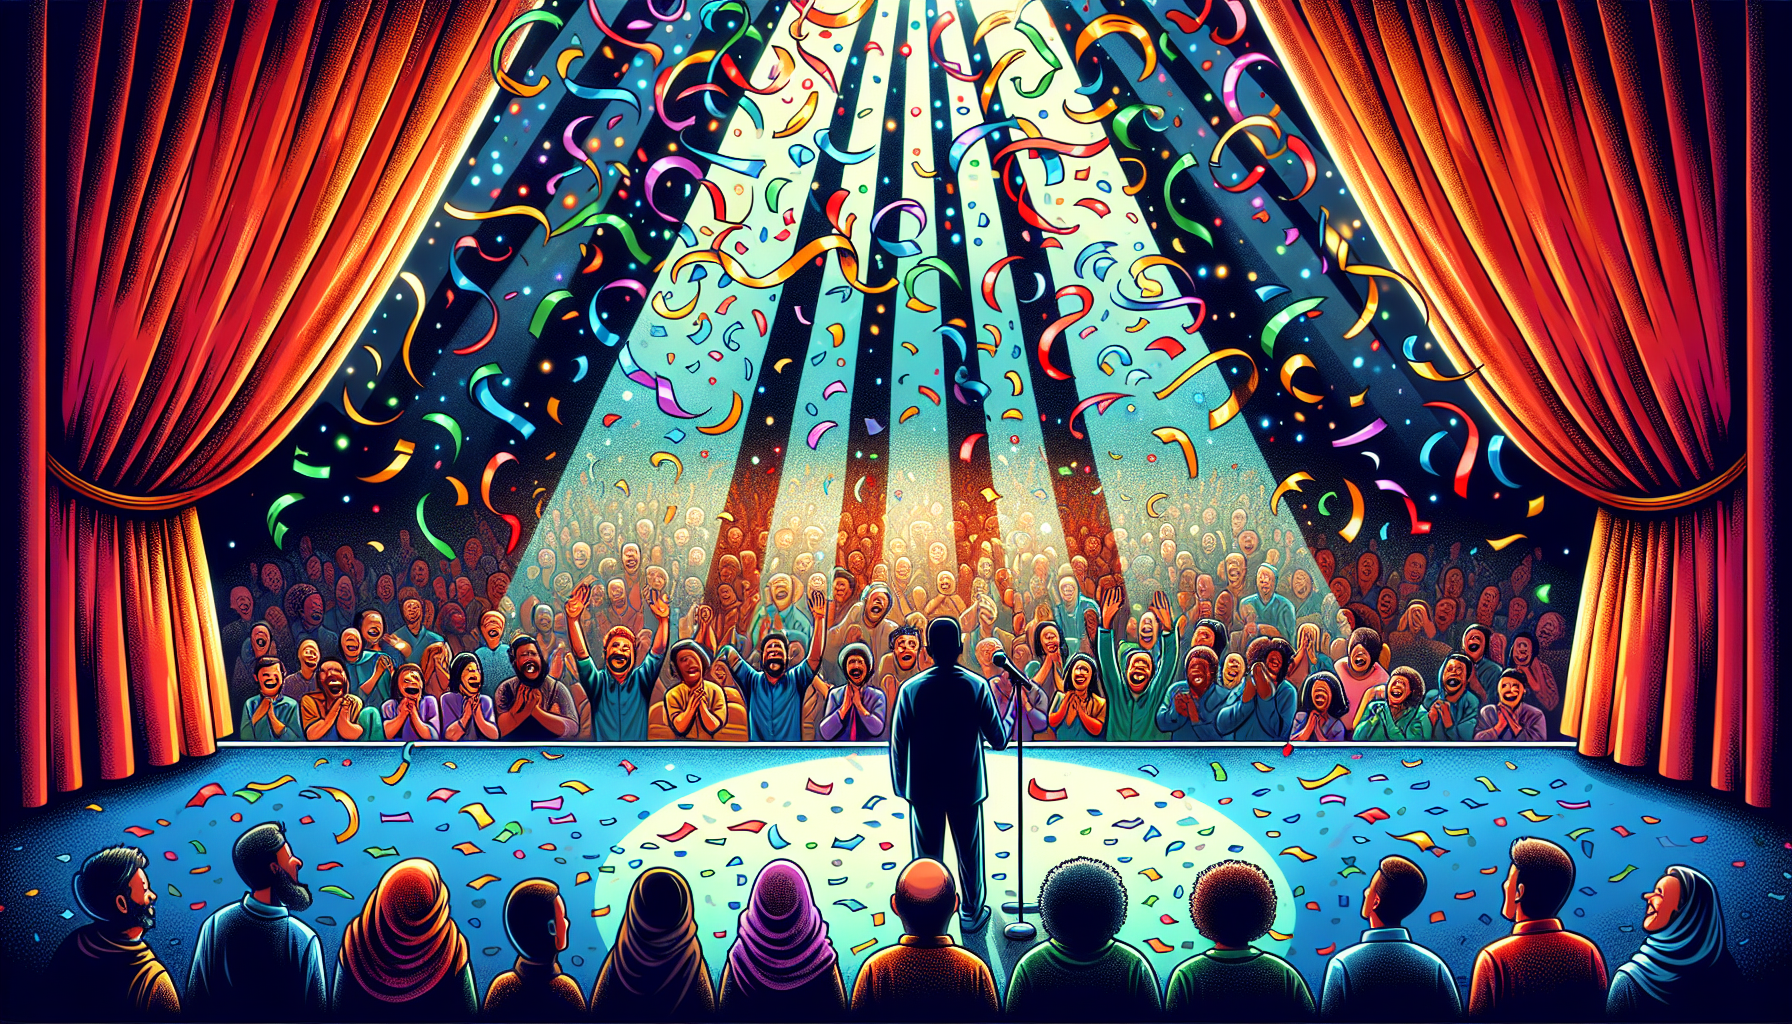 An illustrator's depiction of a colorful comedy club stage during the finale of a stand-up performance, with an audience in fits of laughter as confetti falls from above, highlighting the comedian tak